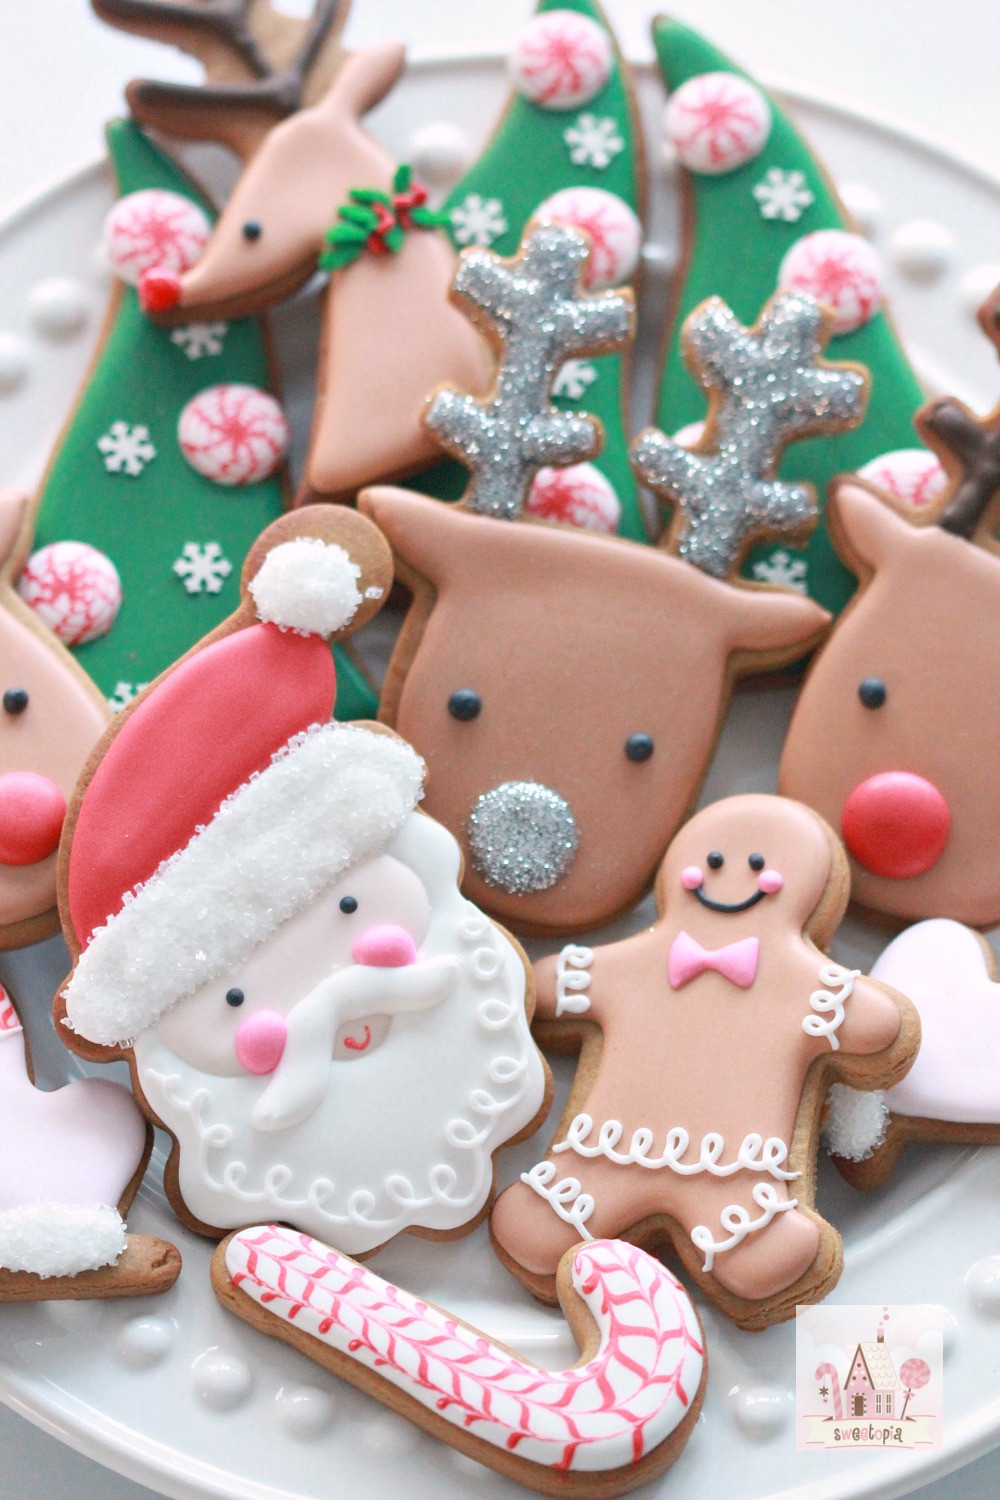 Decorating Christmas Cookies
 Video How to Decorate Christmas Cookies Simple Designs